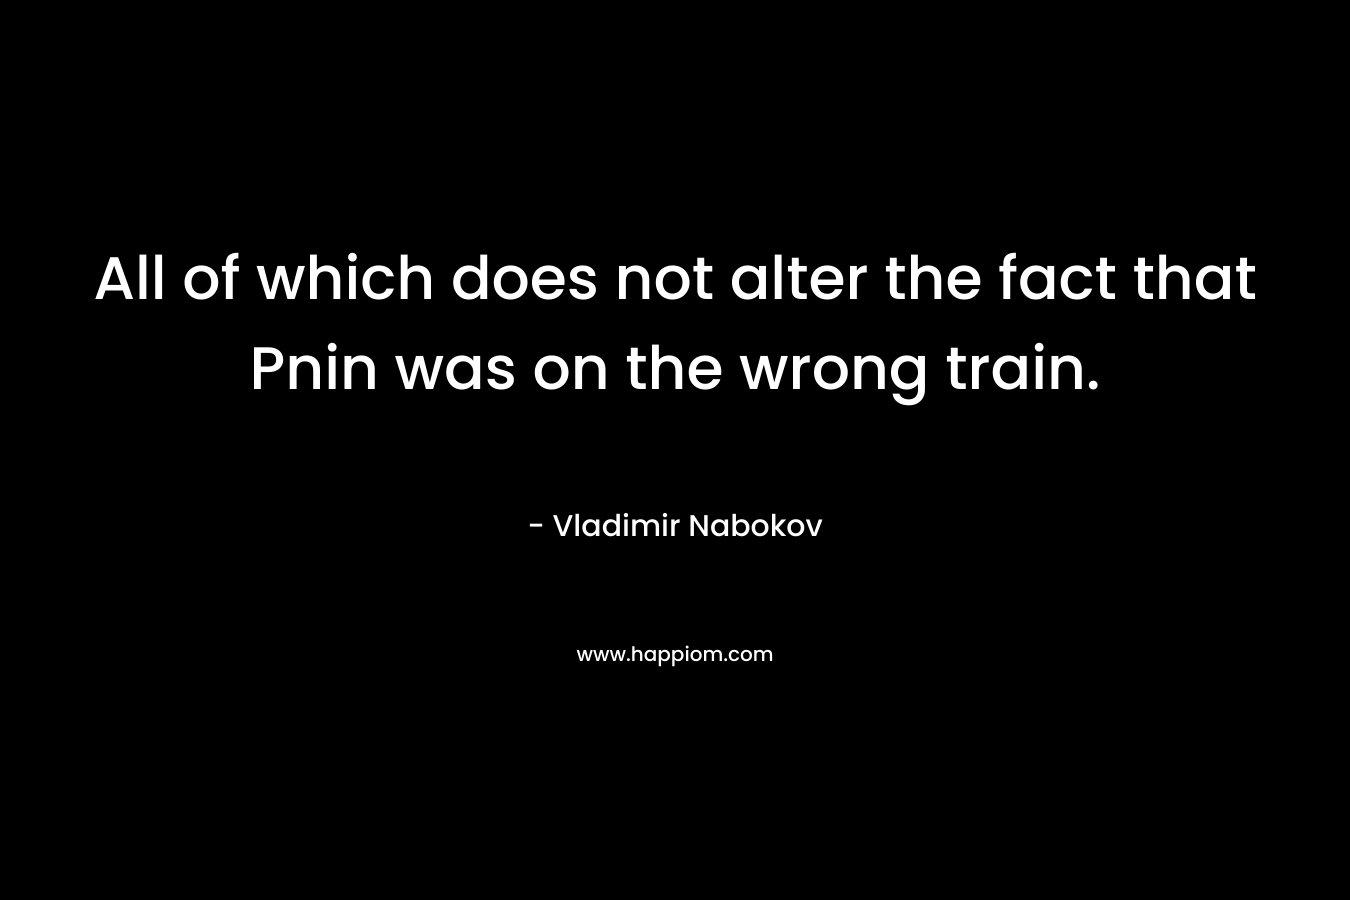 All of which does not alter the fact that Pnin was on the wrong train. – Vladimir Nabokov